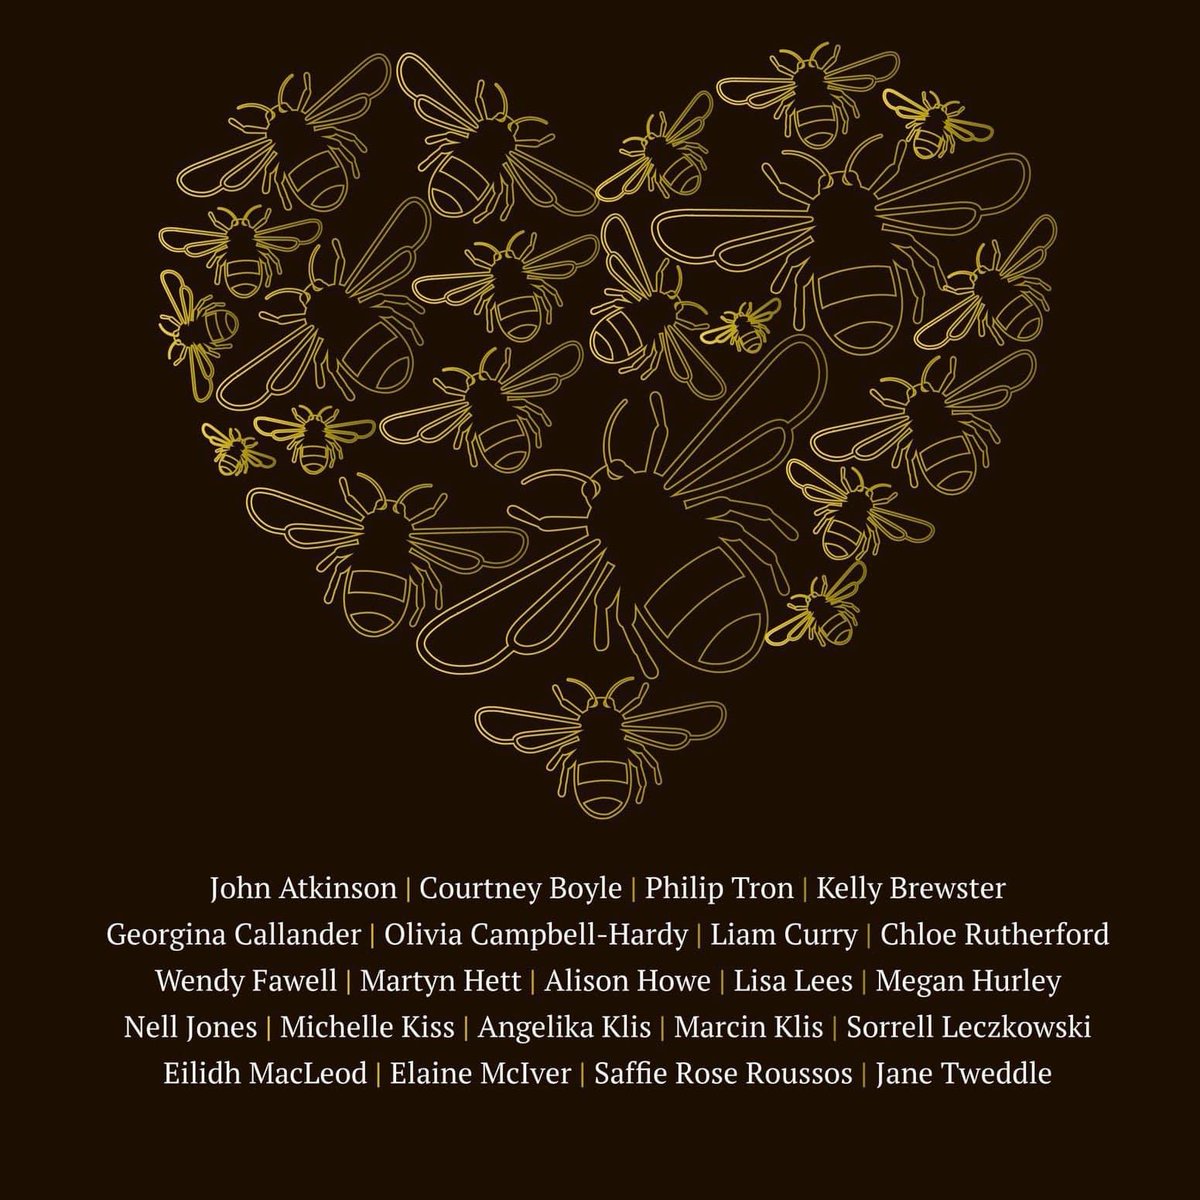 Today our thoughts are with the people of Manchester. We remember the families who lost loved ones and those who were injured and had their lives shattered because of the Manchester Arena attack on 22 May 2017.

Six years on you are still very much in our thoughts.

#protectduty